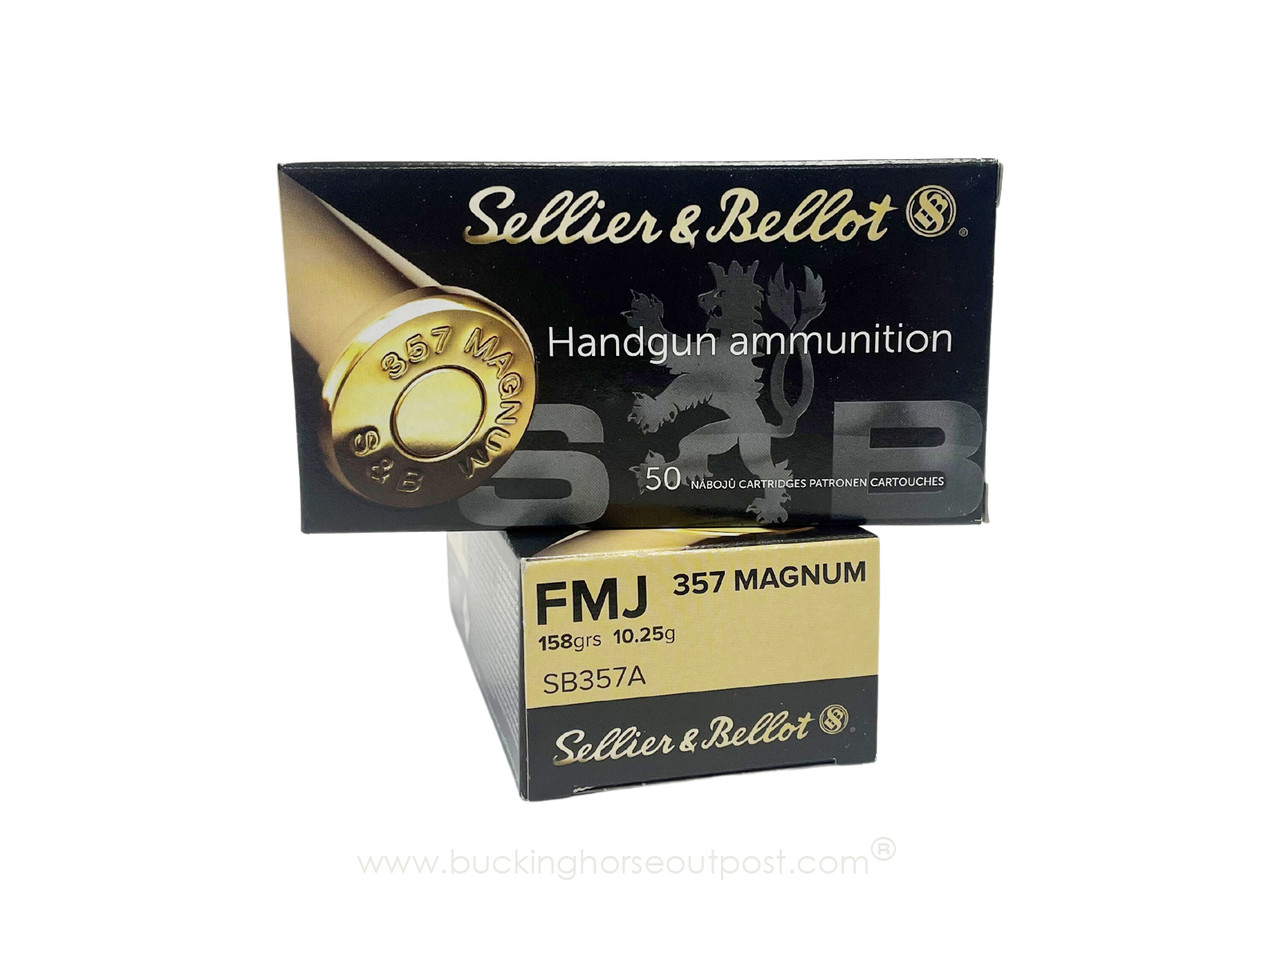 Sellier & Bellot .357 Magnum 158 Grain Full Metal Jacket 50rds Per Box (SB357A) - FREE SHIPPING on orders over $175